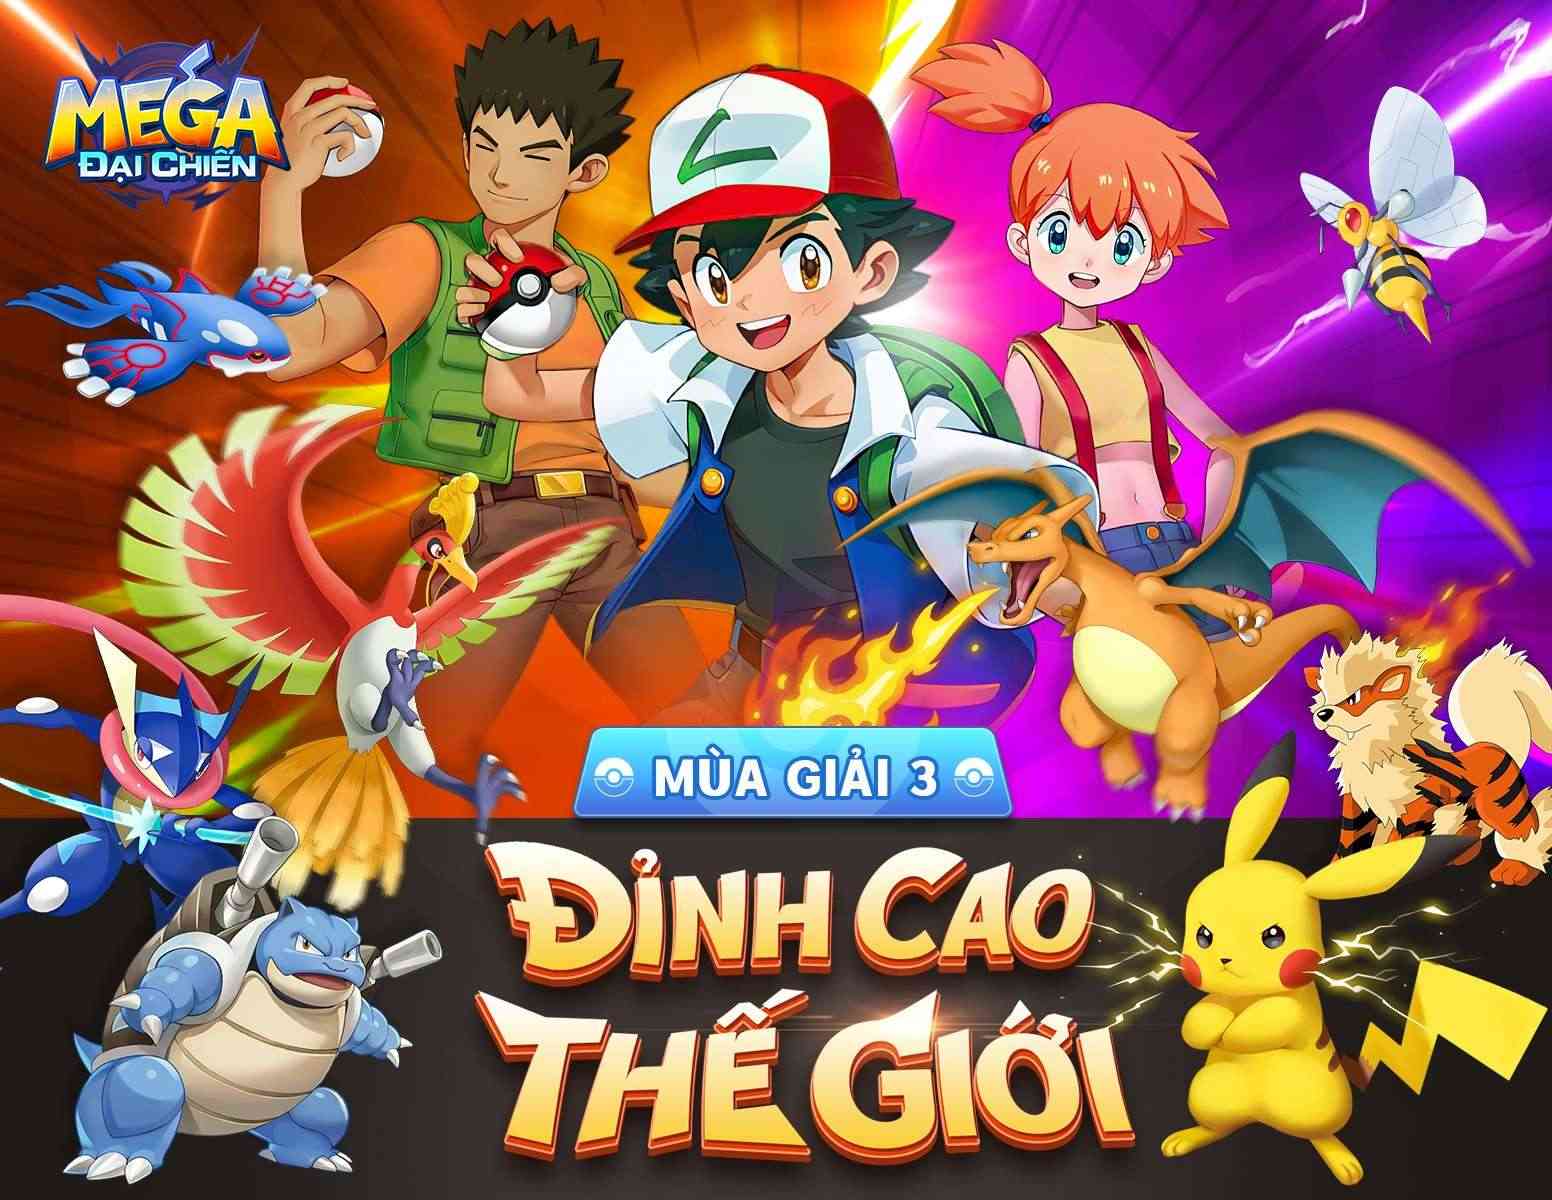 Reaching 1 million downloads, Mega Dai Chien becomes the number 1 Pet Pokemon fighting game in Vietnam